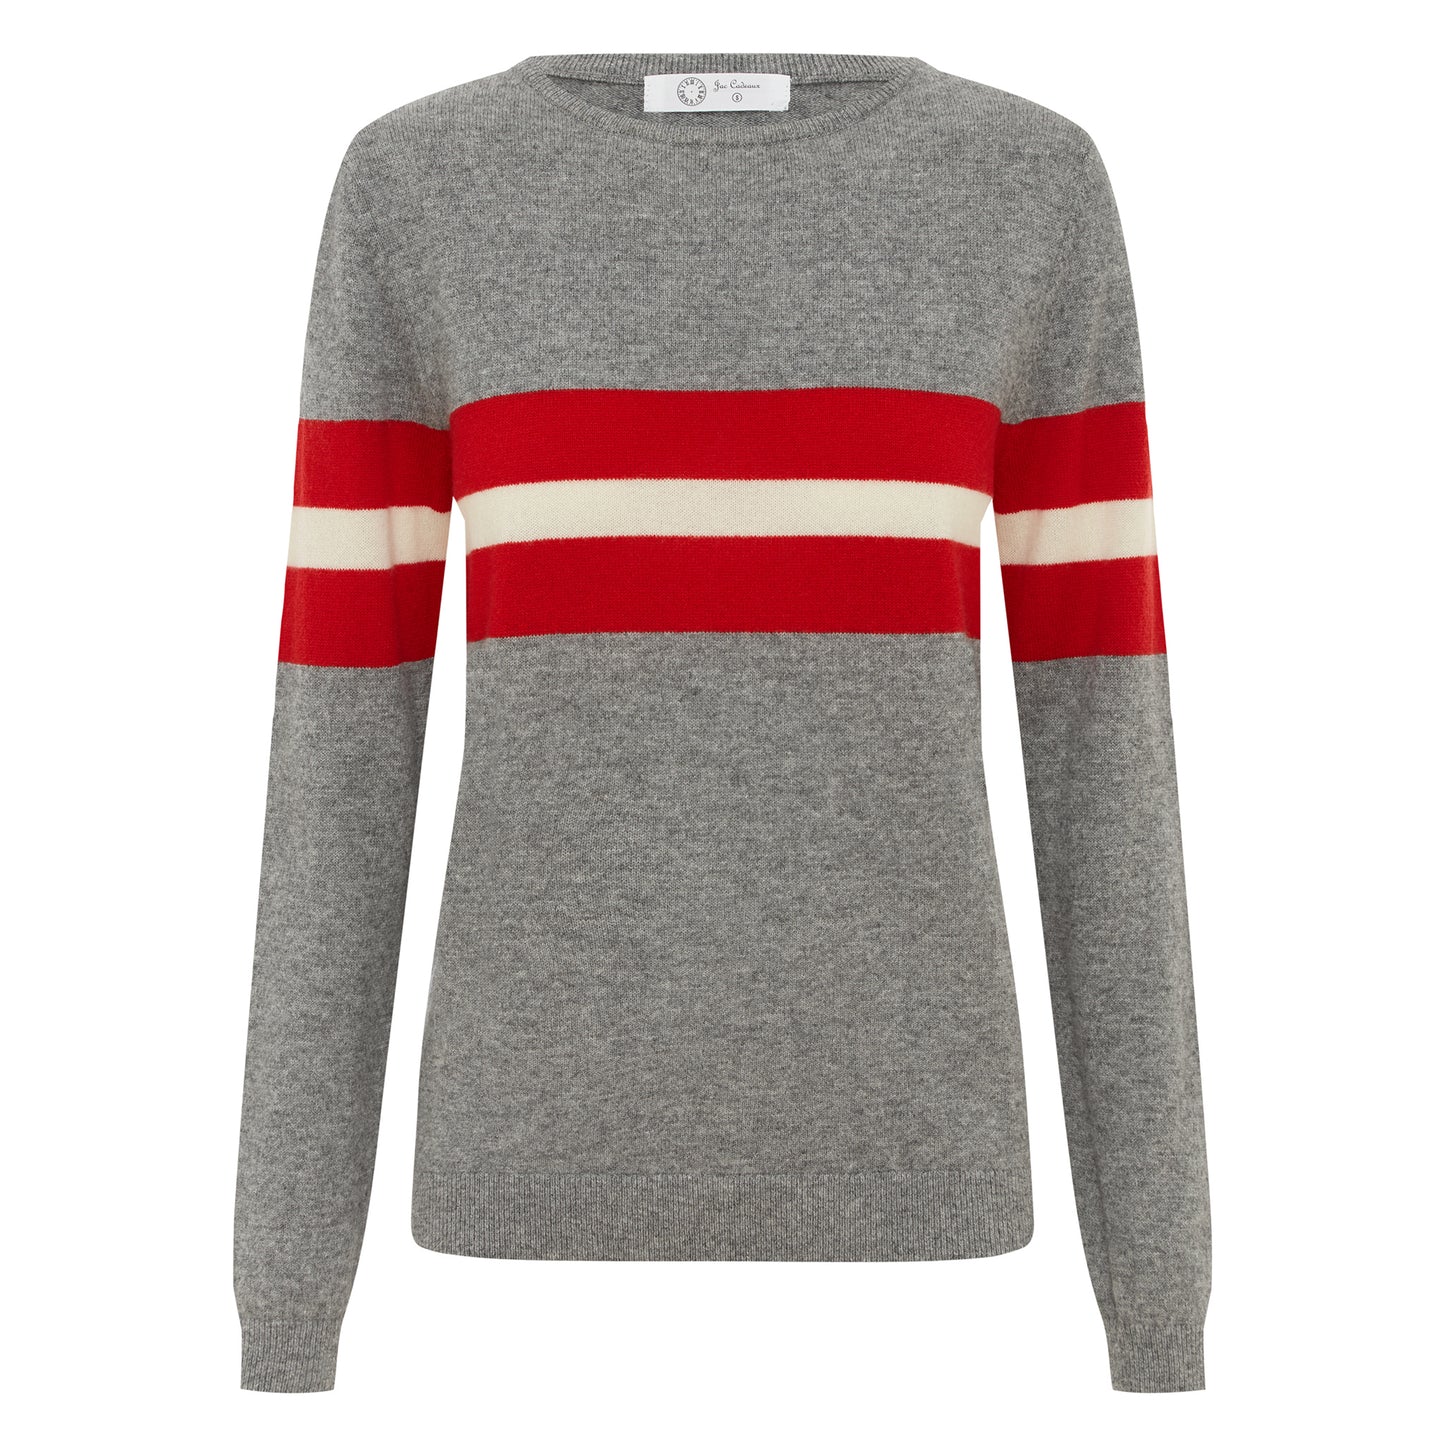 Cashmere & Wool French Racer Crewneck Sweater - GREY